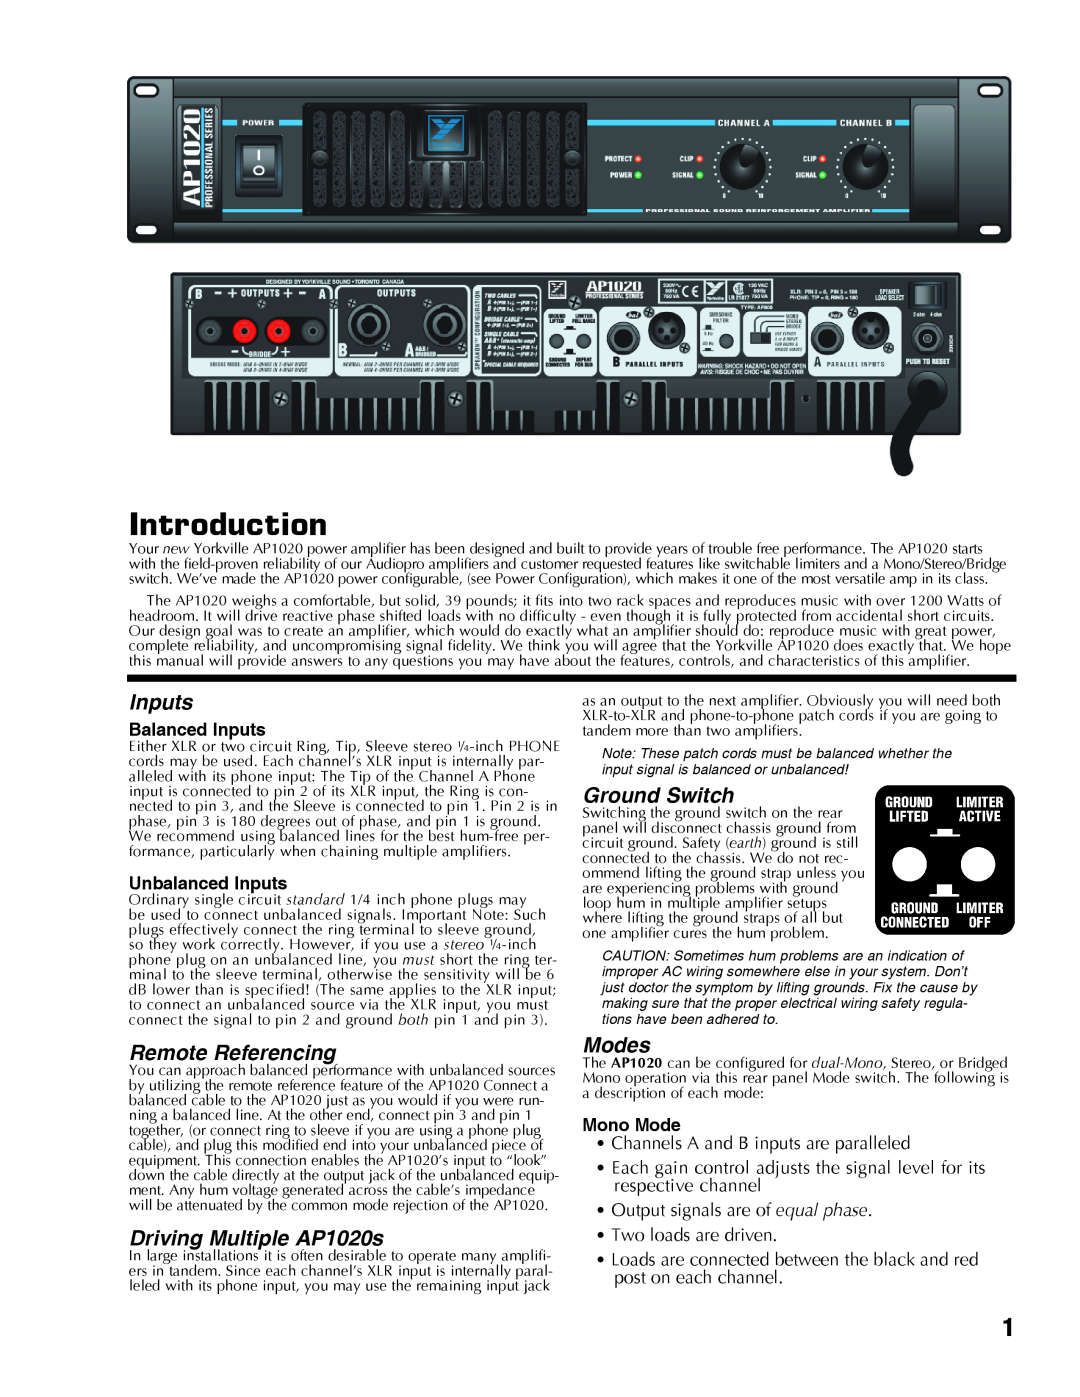 Yorkville Sound manual Introduction, Inputs, Ground Switch, Remote Referencing, Driving Multiple AP1020s, Modes 